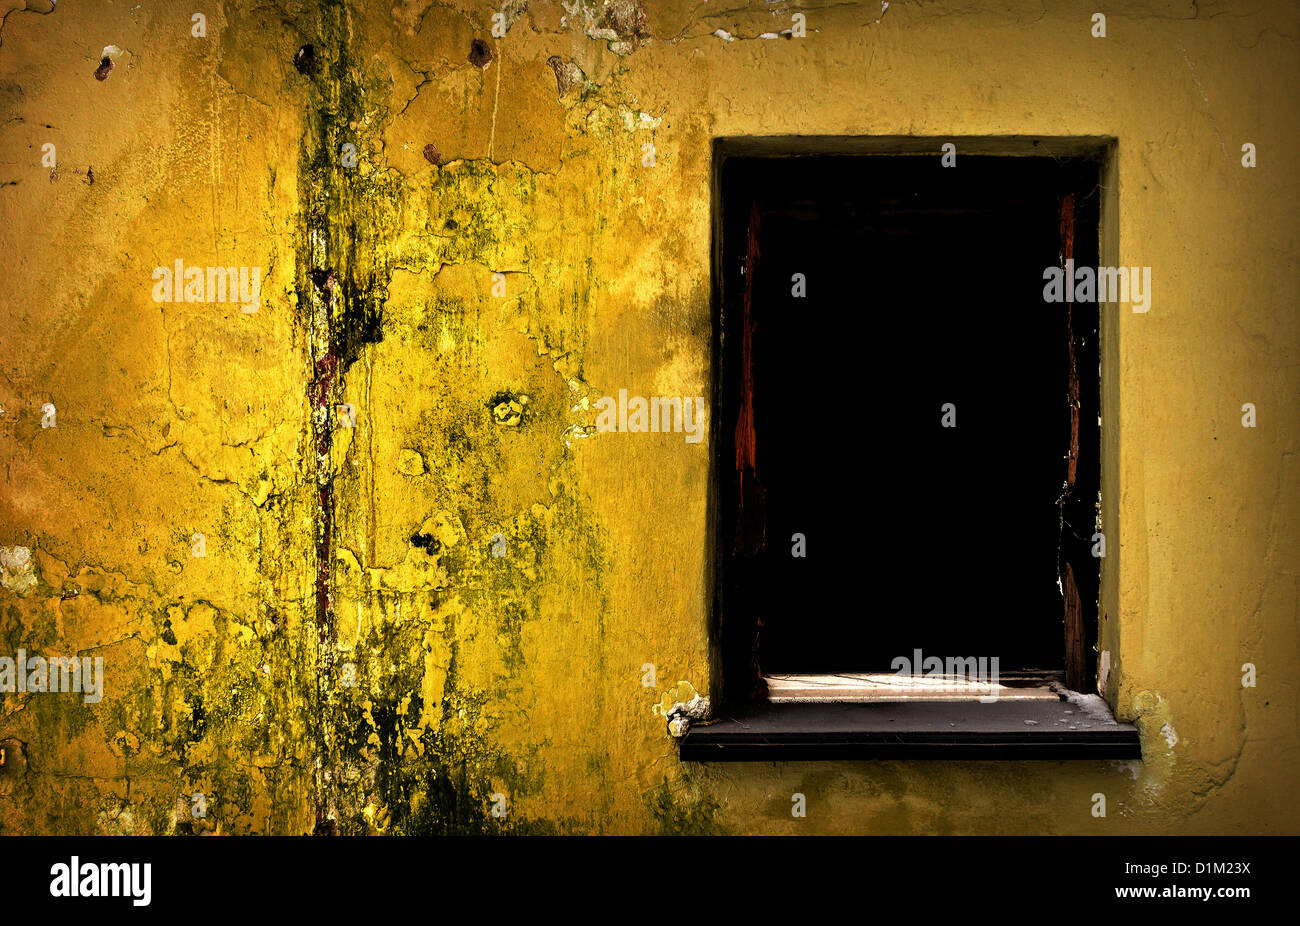 Black window of abandoned ruined building and golden-yellow wall. Stock Photo